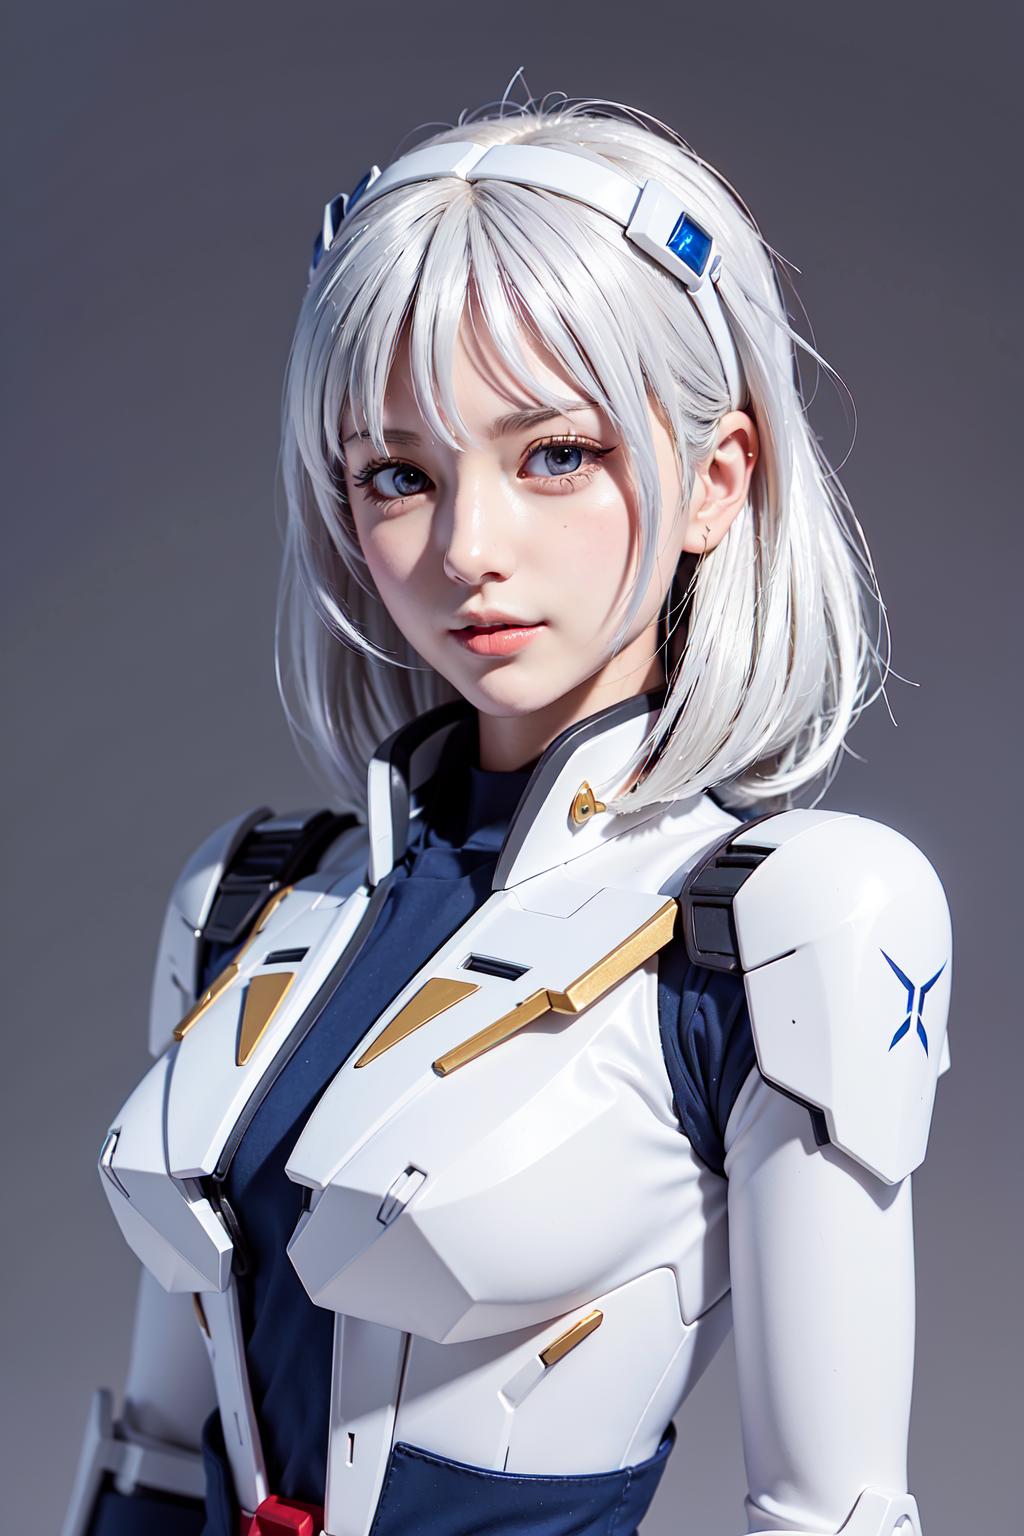 AI model image by pigineer